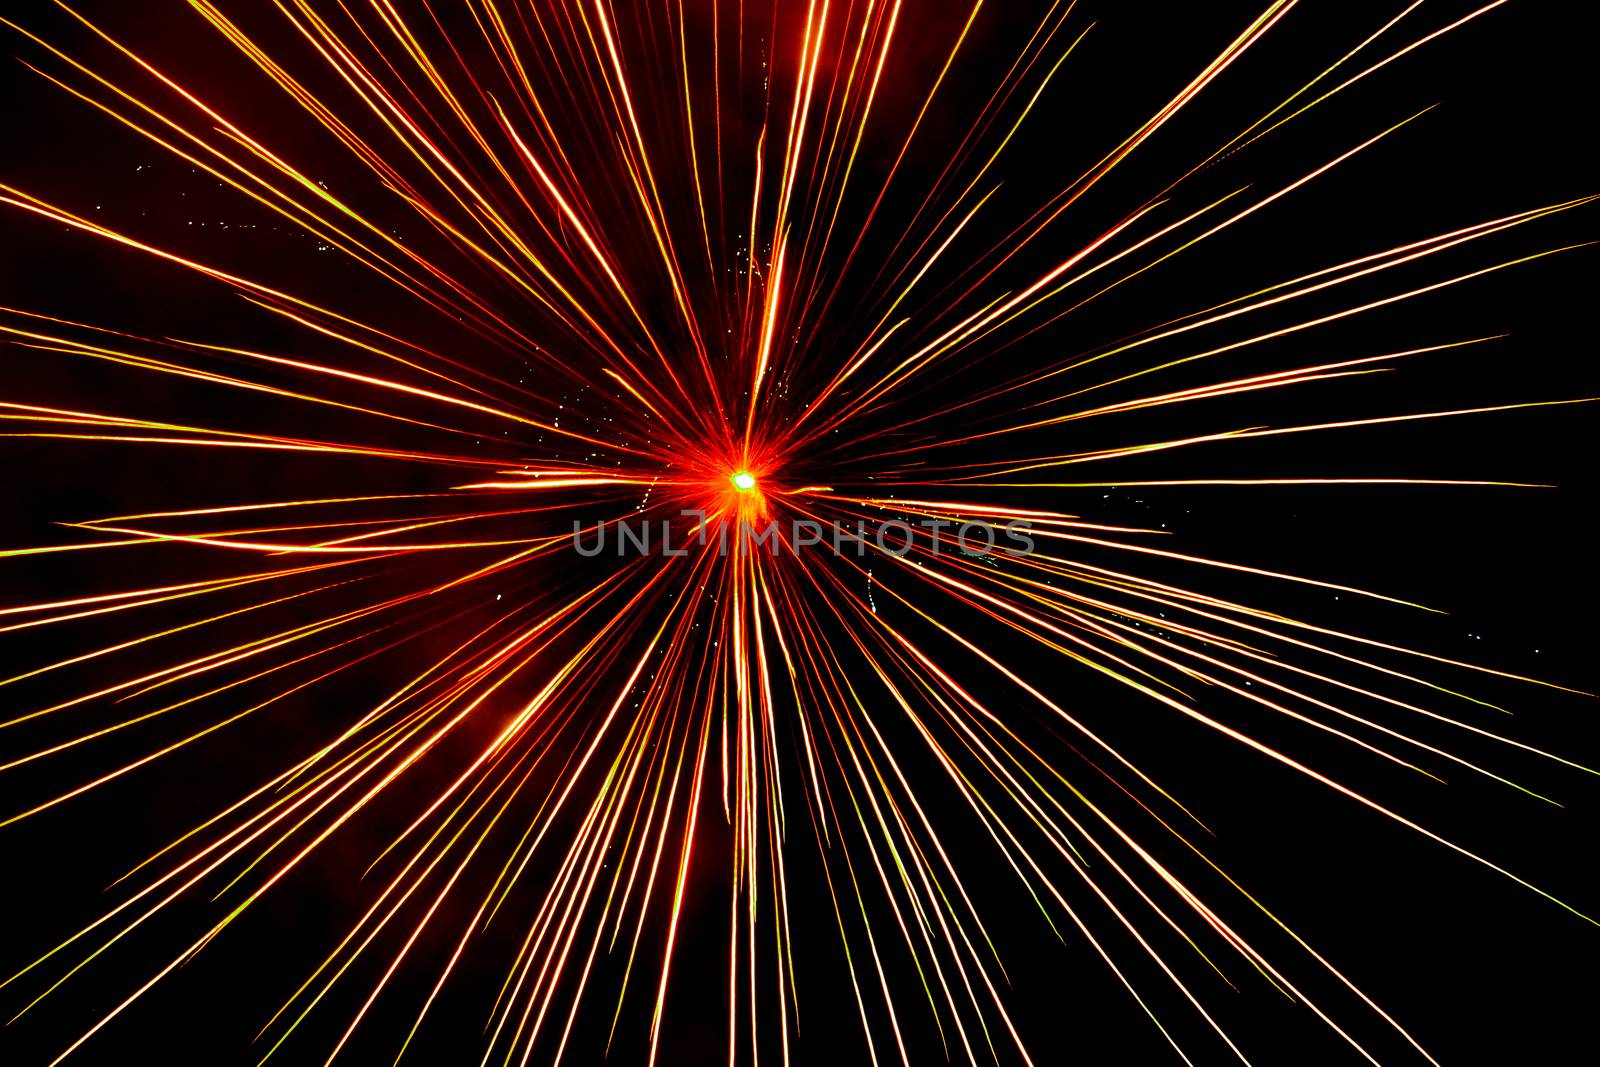 Lines of light rising from the middle of the fireworks.